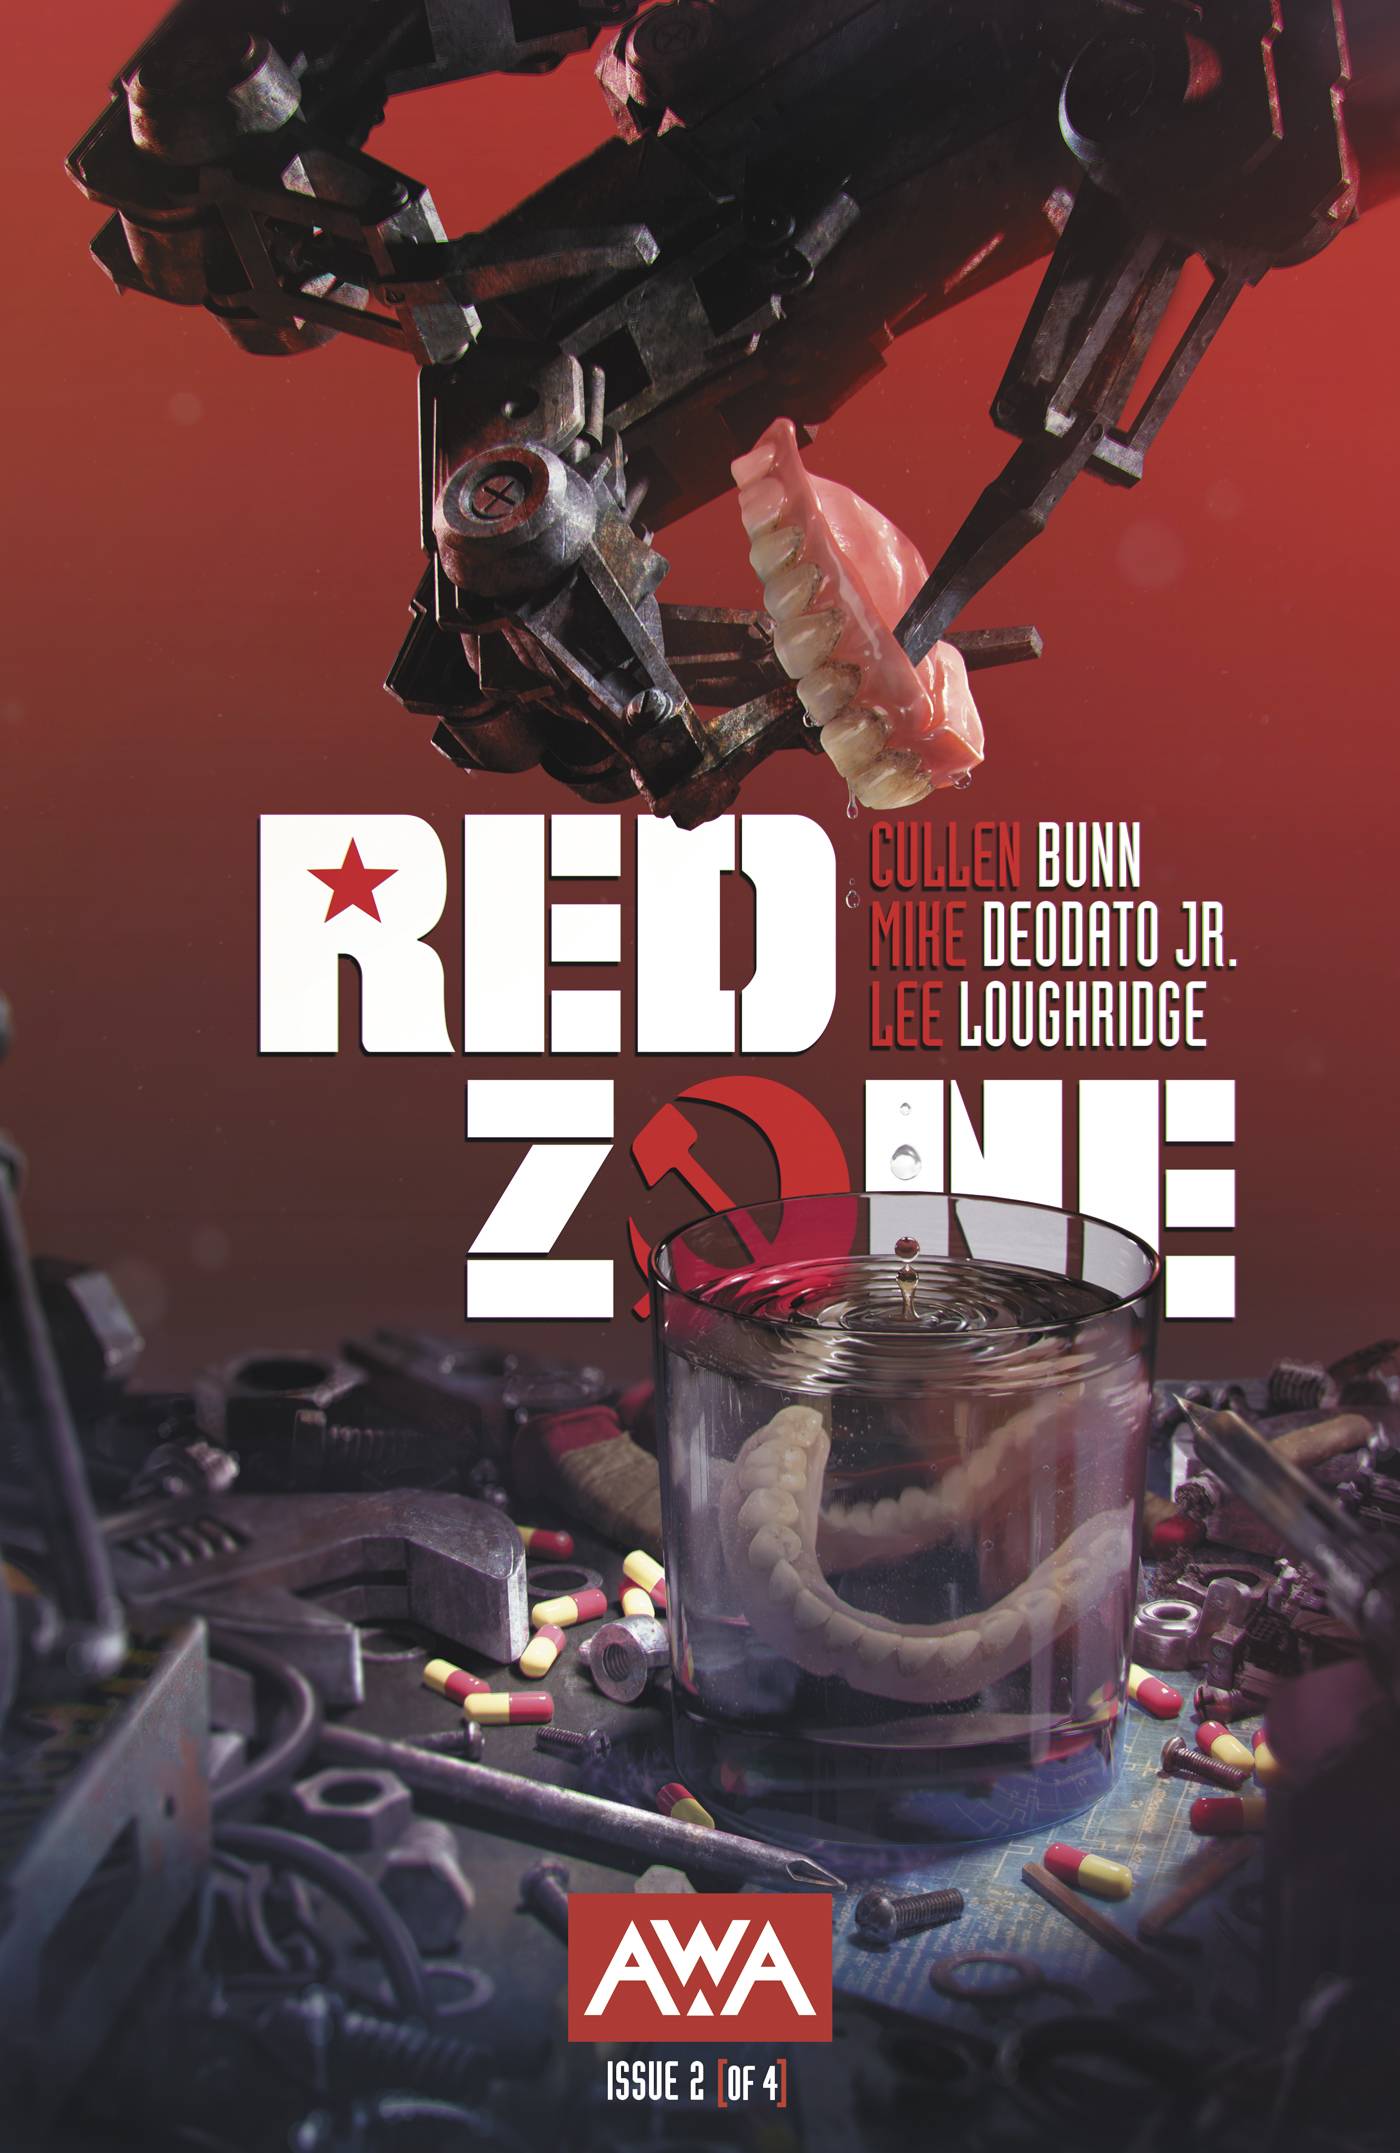 Red Zone #2